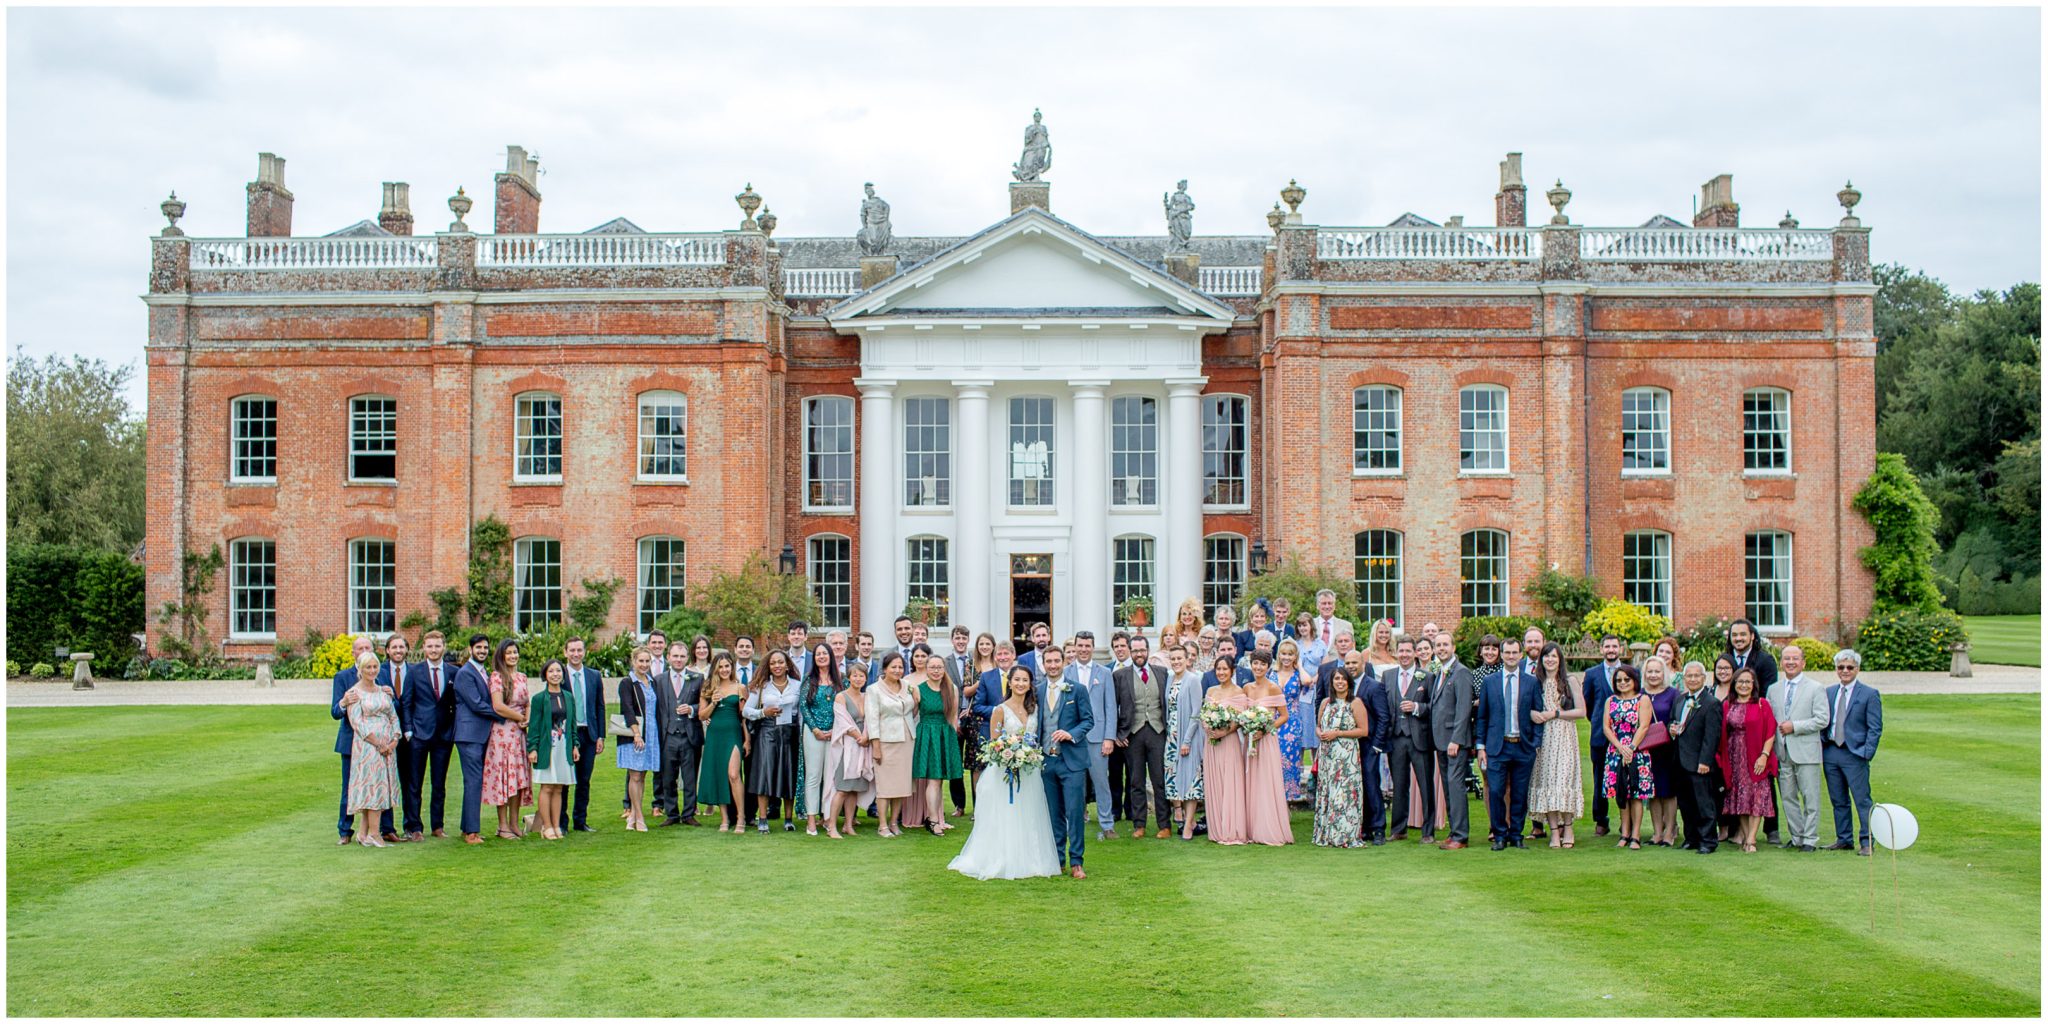 Large group photos of wedding guests in front of the wedding venue